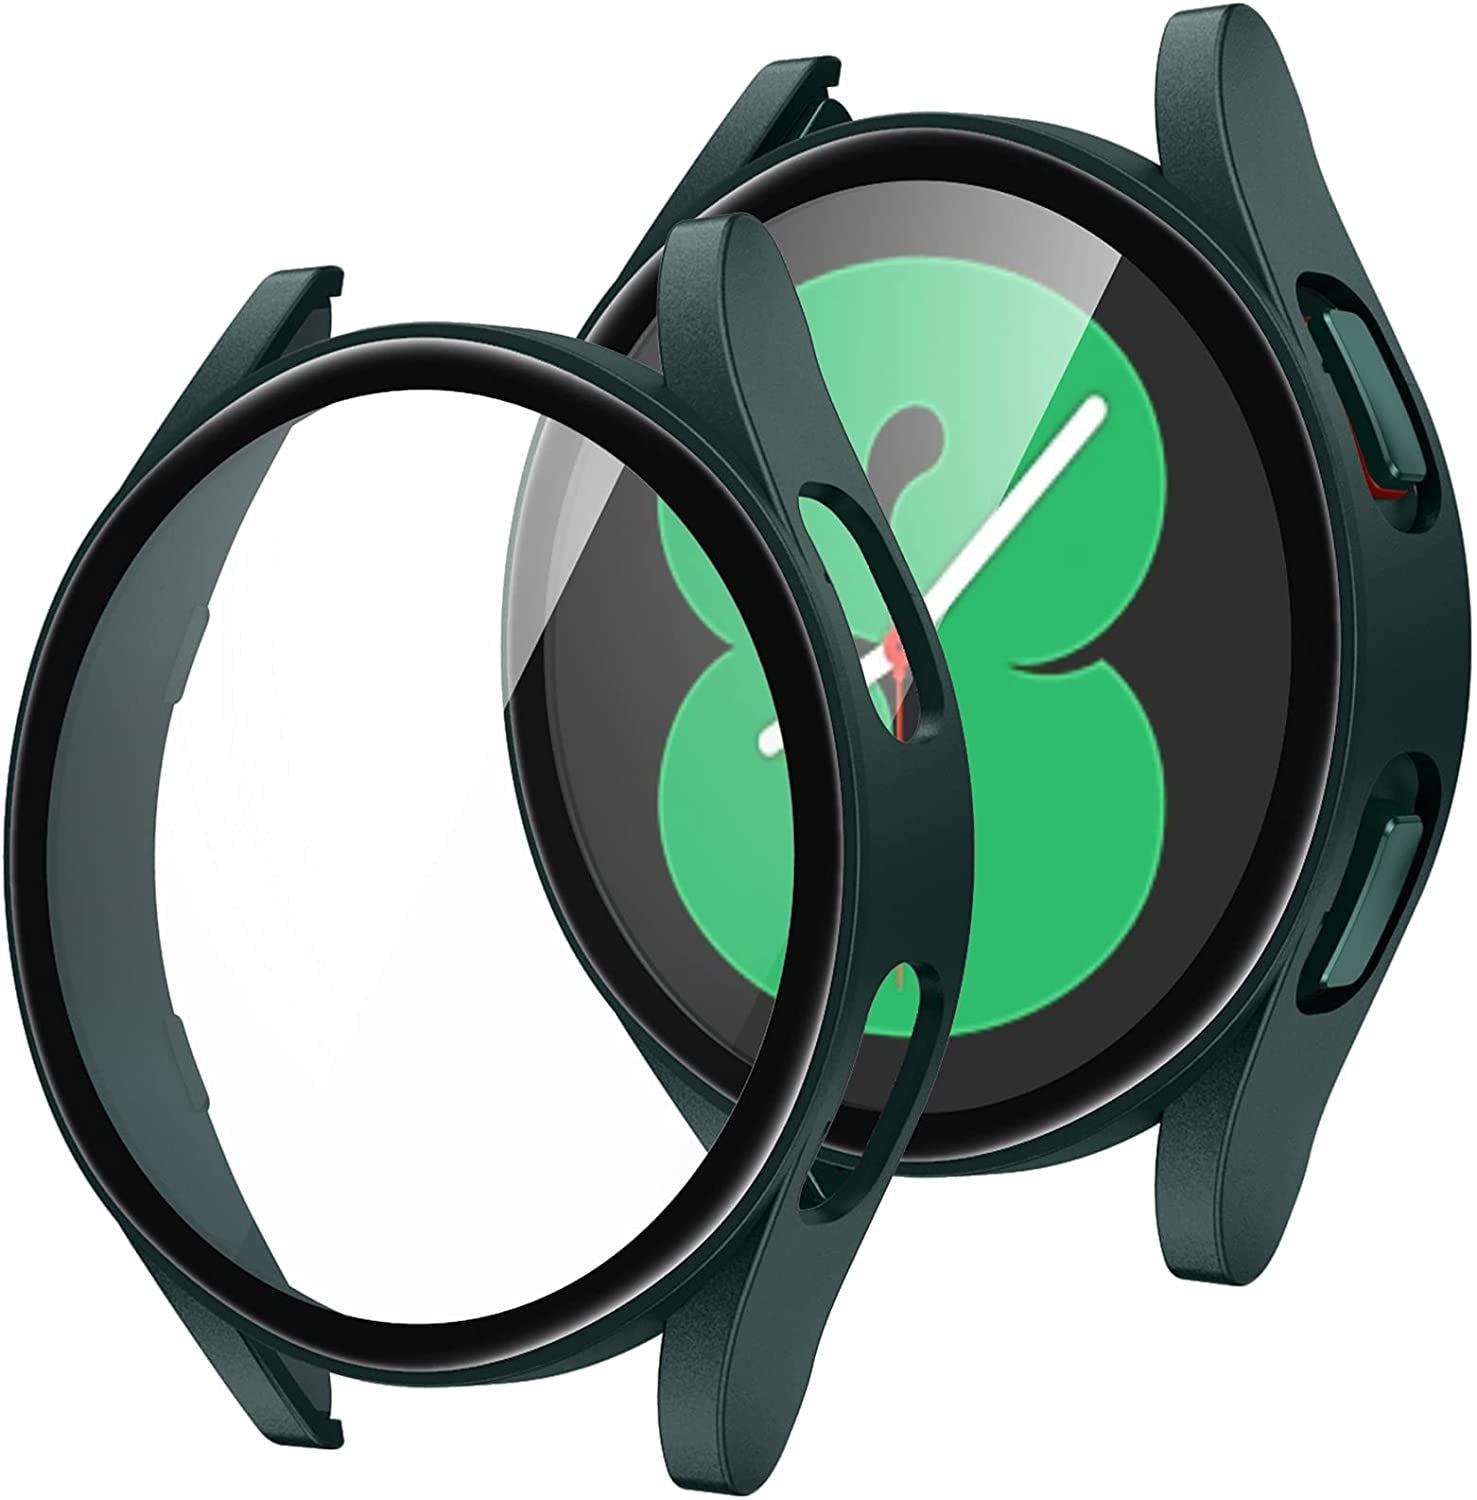 Samsung Galaxy Watch Case with Screen Protector